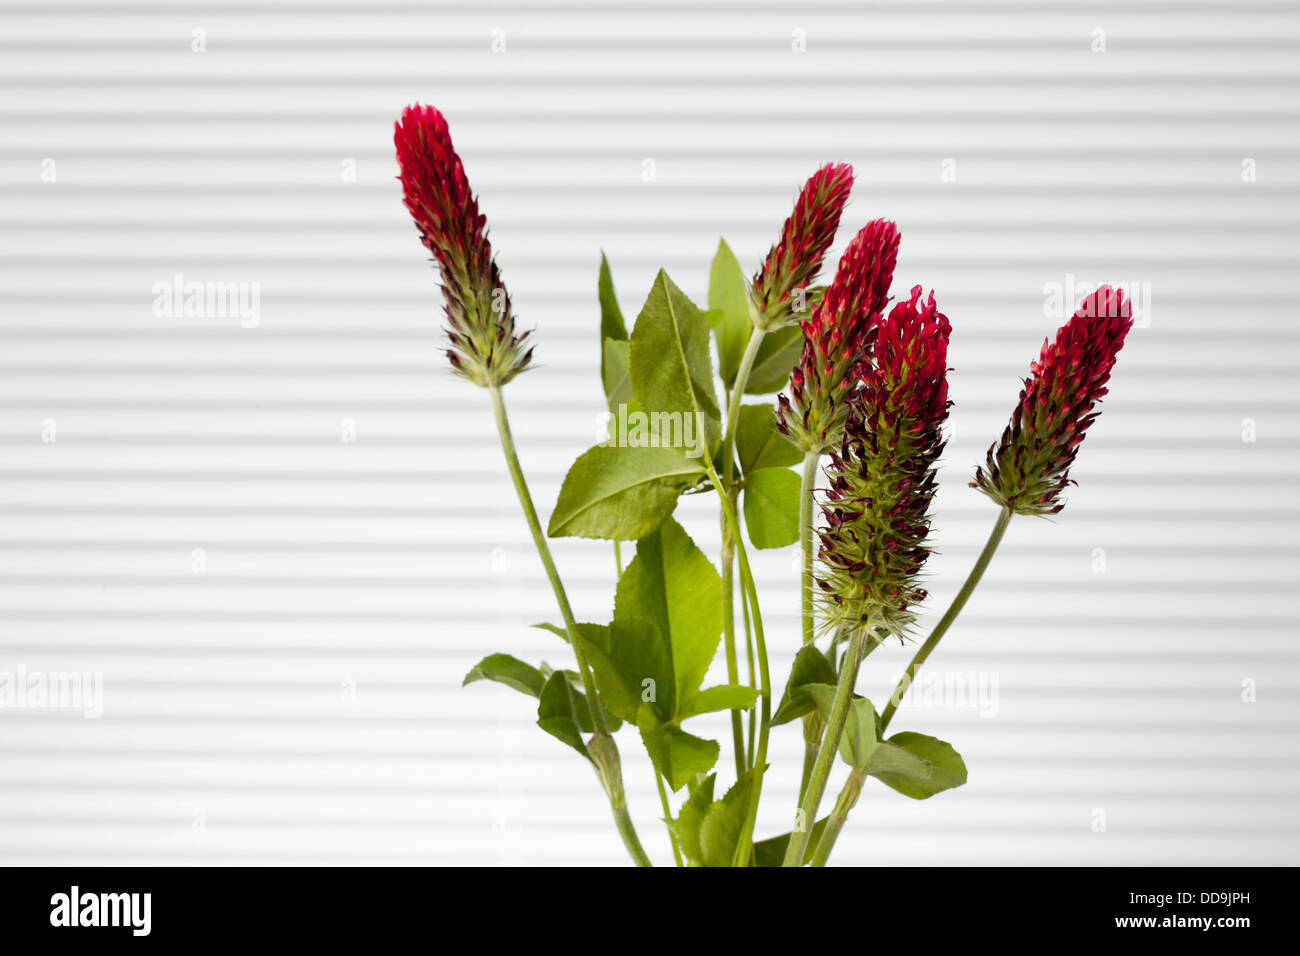 Red Trifoil flowers against white background, close up Stock Photo